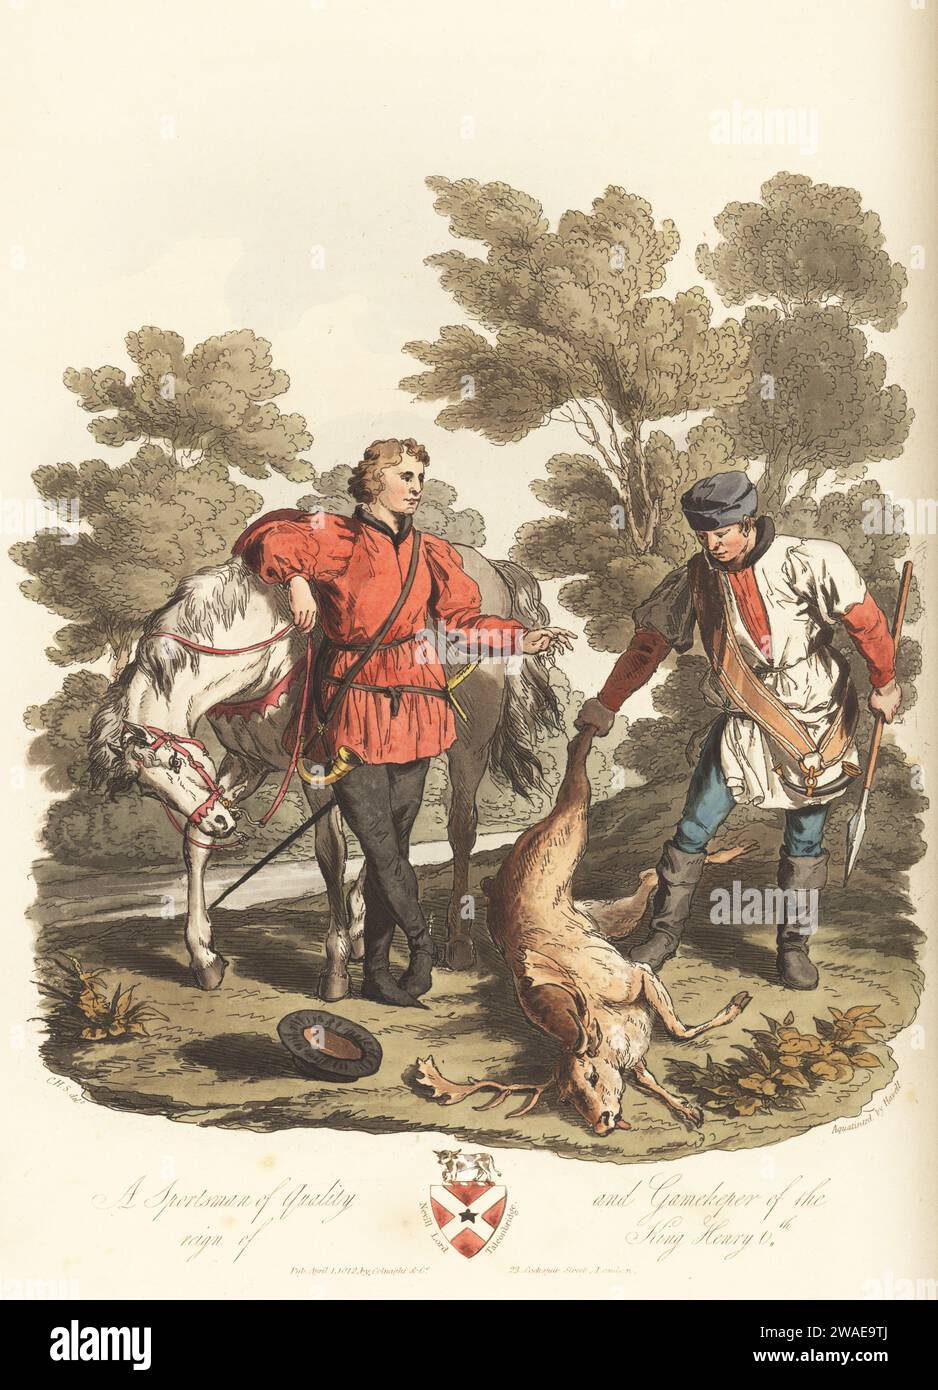 Noble hunter in scarlet doublet with puffed sleeves, black hose, felt hat, with sword and hunting horn. Gamekeeper in smock, bawdrick, girdle and boots, with short boar spear. Coat of arms of Nevill, Lord Talconbridge. Sportsman from an illuminated missal, gamekeeper from Cotton MS Augustus A 5. Blazon of William Nevill, Lord Fauconbridge. Handcoloured copperplate engraving etched by John Augustus Atkinson, aquatinted by Havell, after an illustration by Charles Hamilton Smith from his own Selections of Ancient Costume of Great Britain and Ireland, Colnaghi and Co., London, 1814. Stock Photo